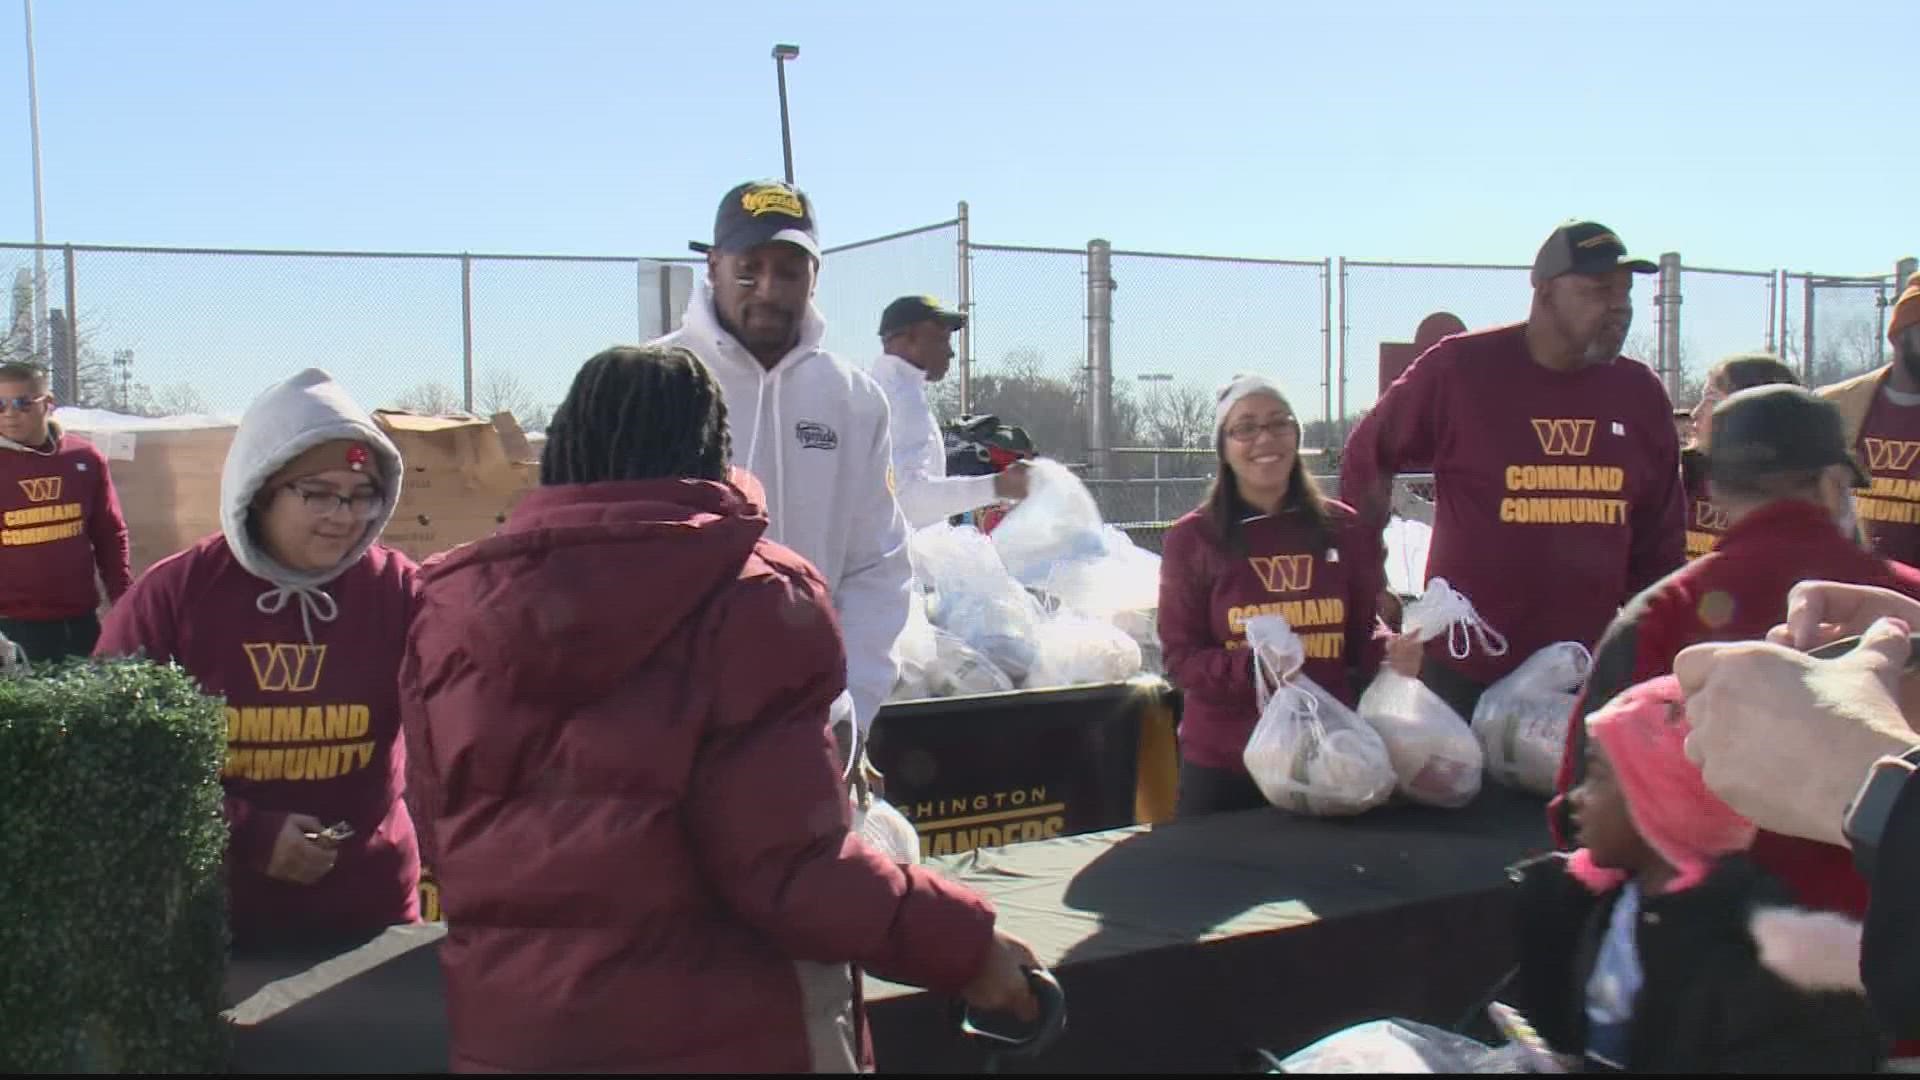 The Washington Commanders gave out 2,500 Thanksgiving turkeys at this year's 'Harvest Feast'.